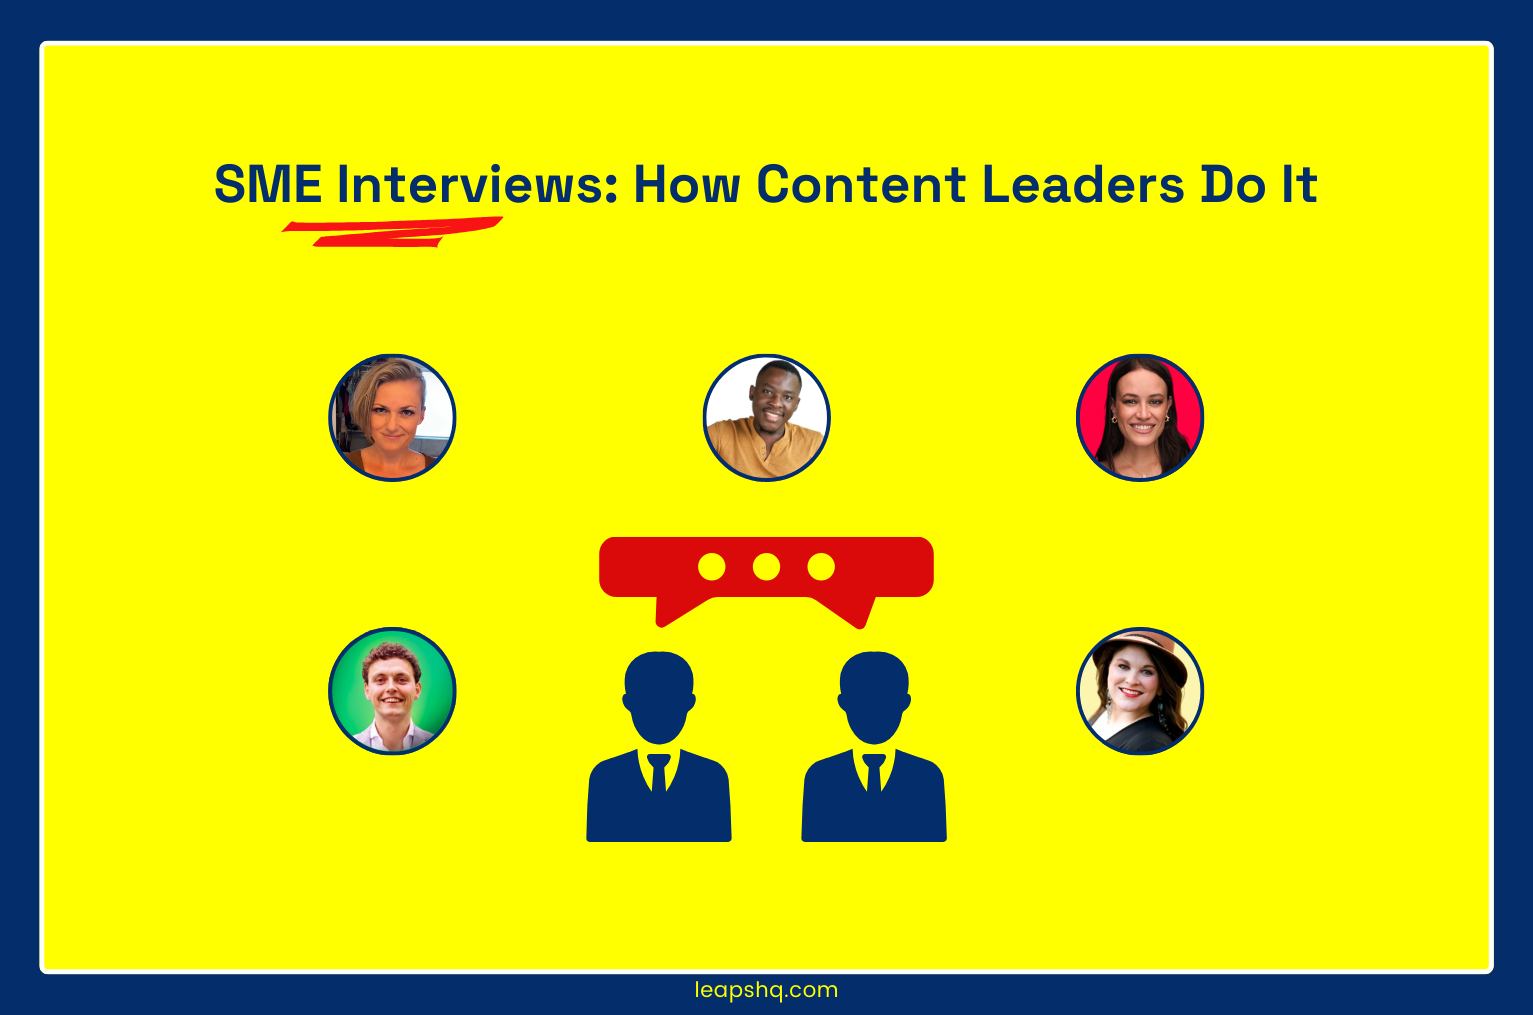 SME Interviews: How Content Leaders Do It